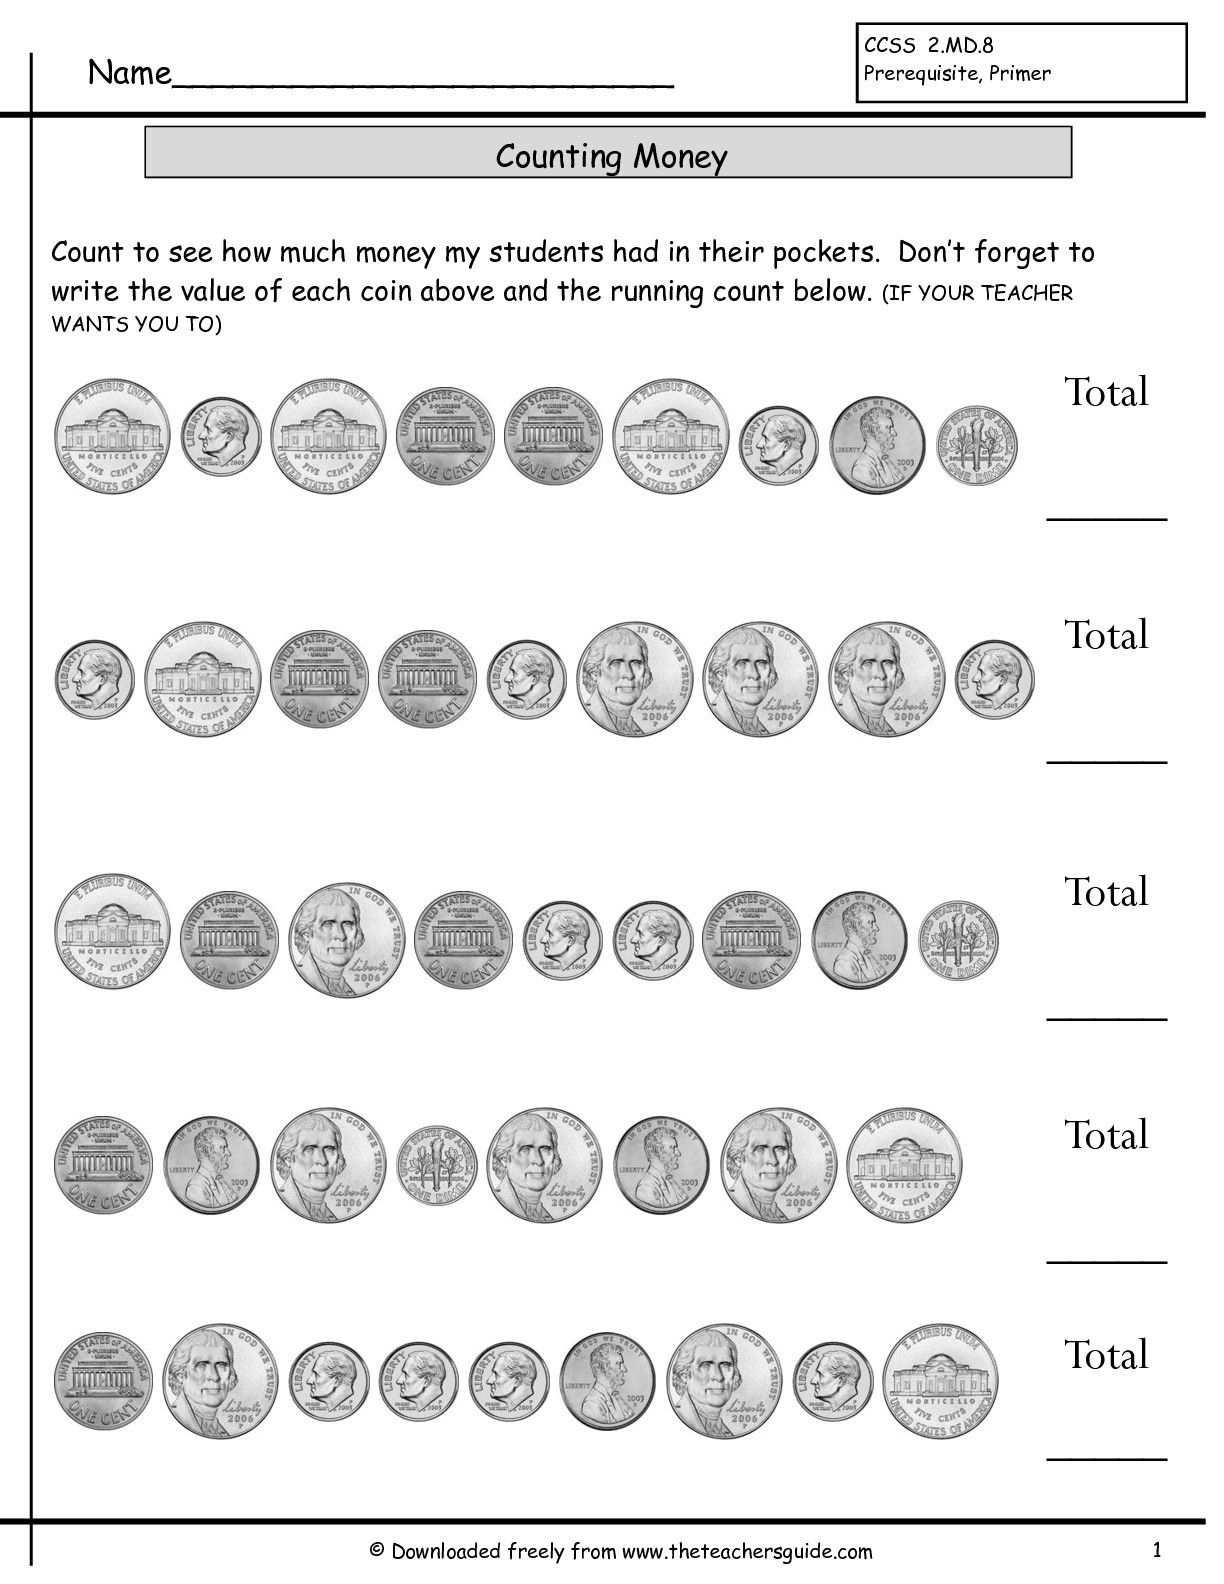 Mixed Coins Worksheet | Counting Coins Worksheets Without Quarters 2 - Free Printable Counting Money Worksheets For 2Nd Grade